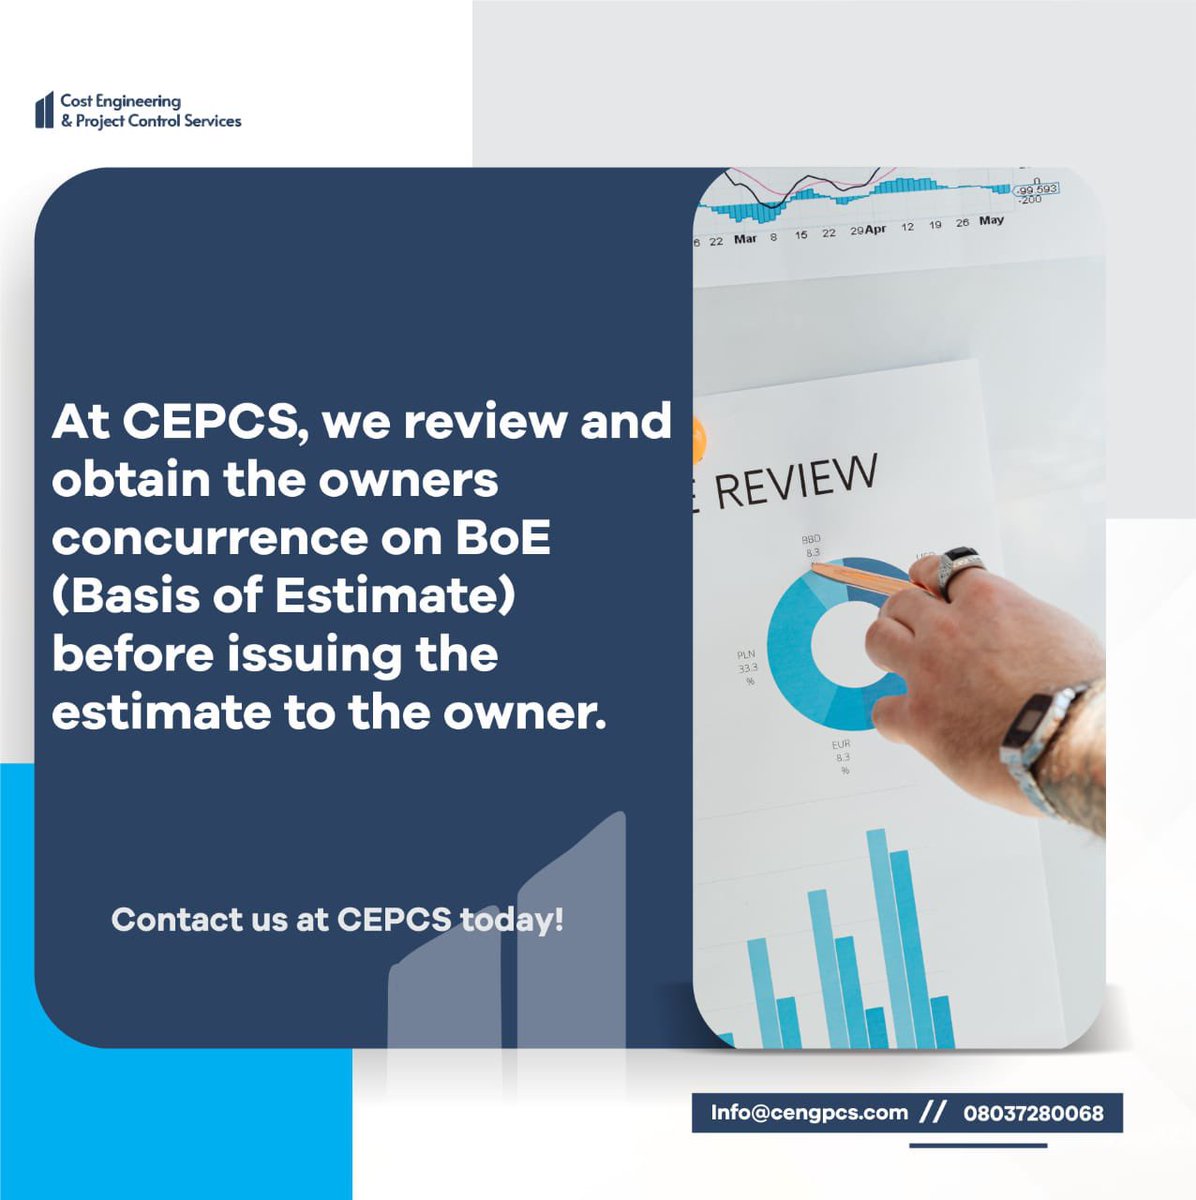 Contact us today at info@cengpcs.com

#costestimating #costestimation #costestimator #projectmanagement #project #engineering #projectplanning #costengineering #costmanagement